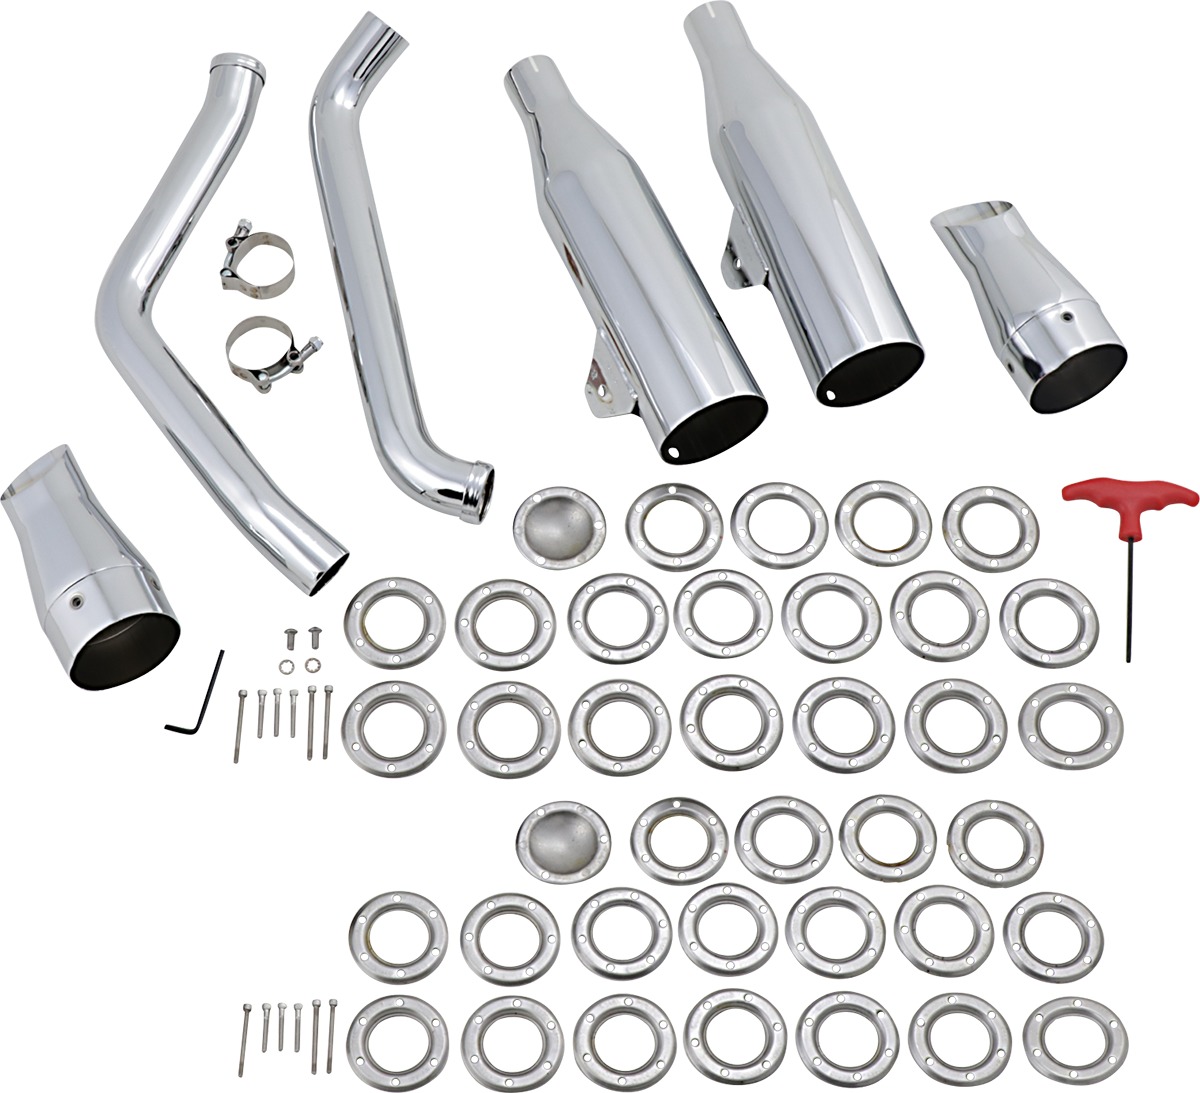 2:2 Staggered Full Exhaust System - For 86-94 Harley Softail - Click Image to Close